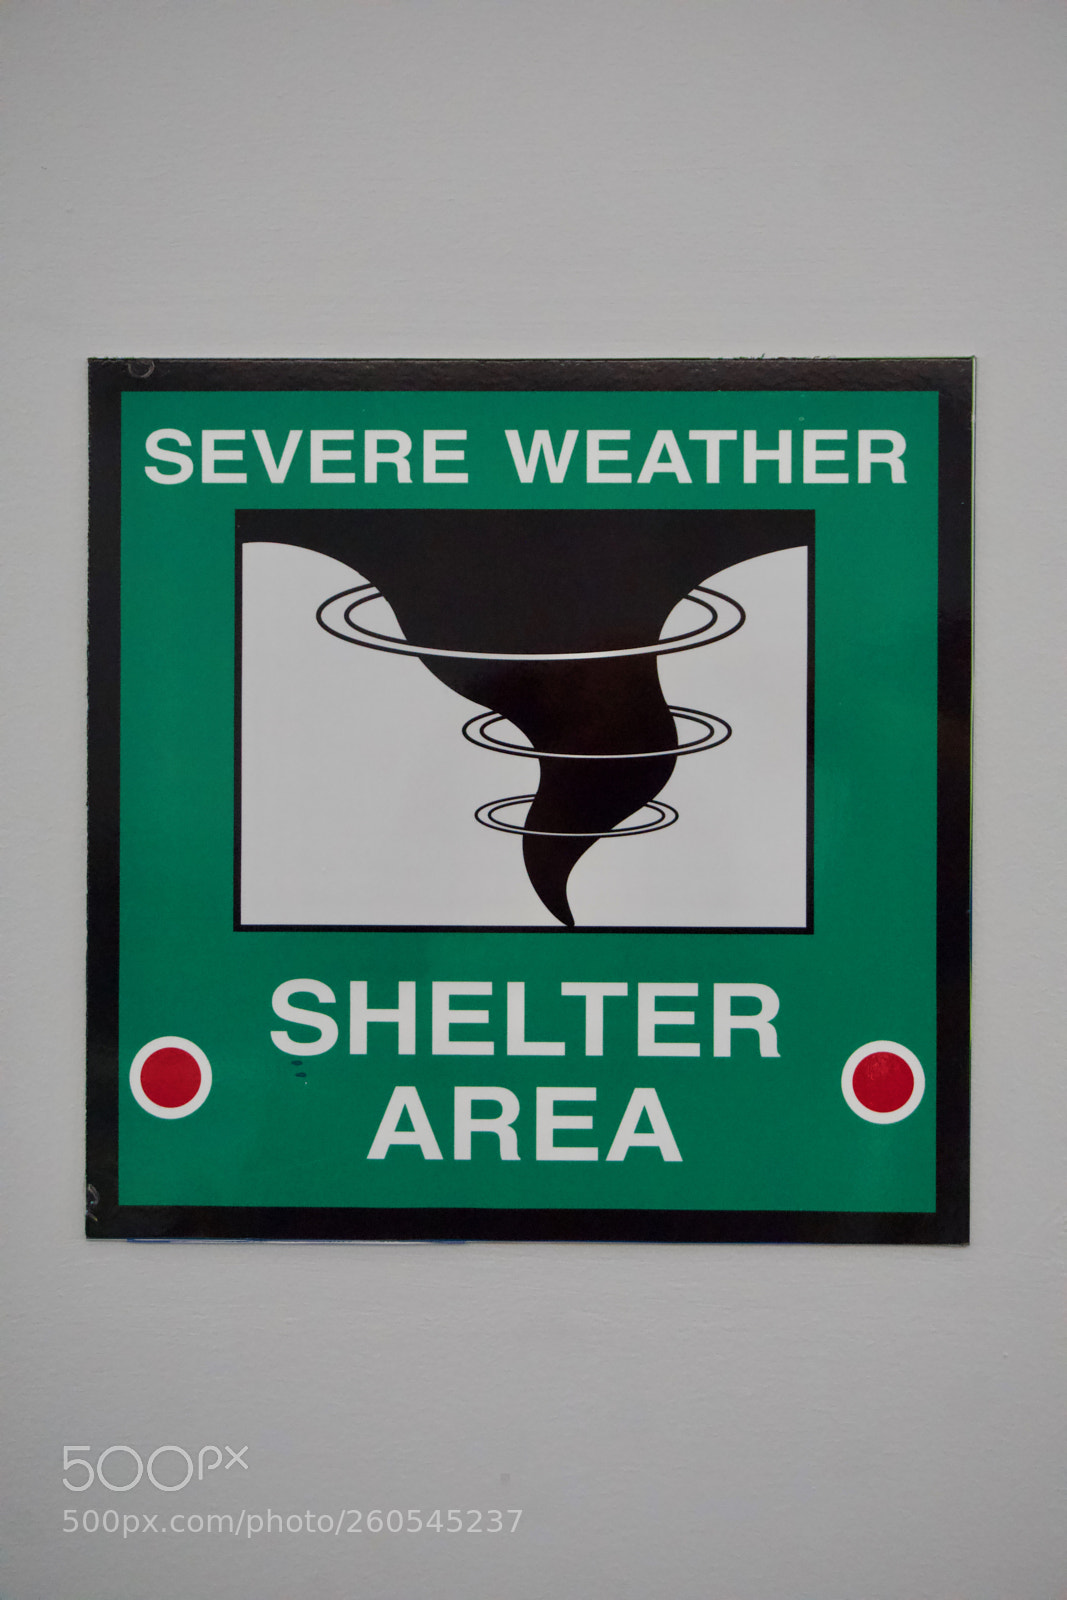 Sony a6000 sample photo. Shelter area sign photography